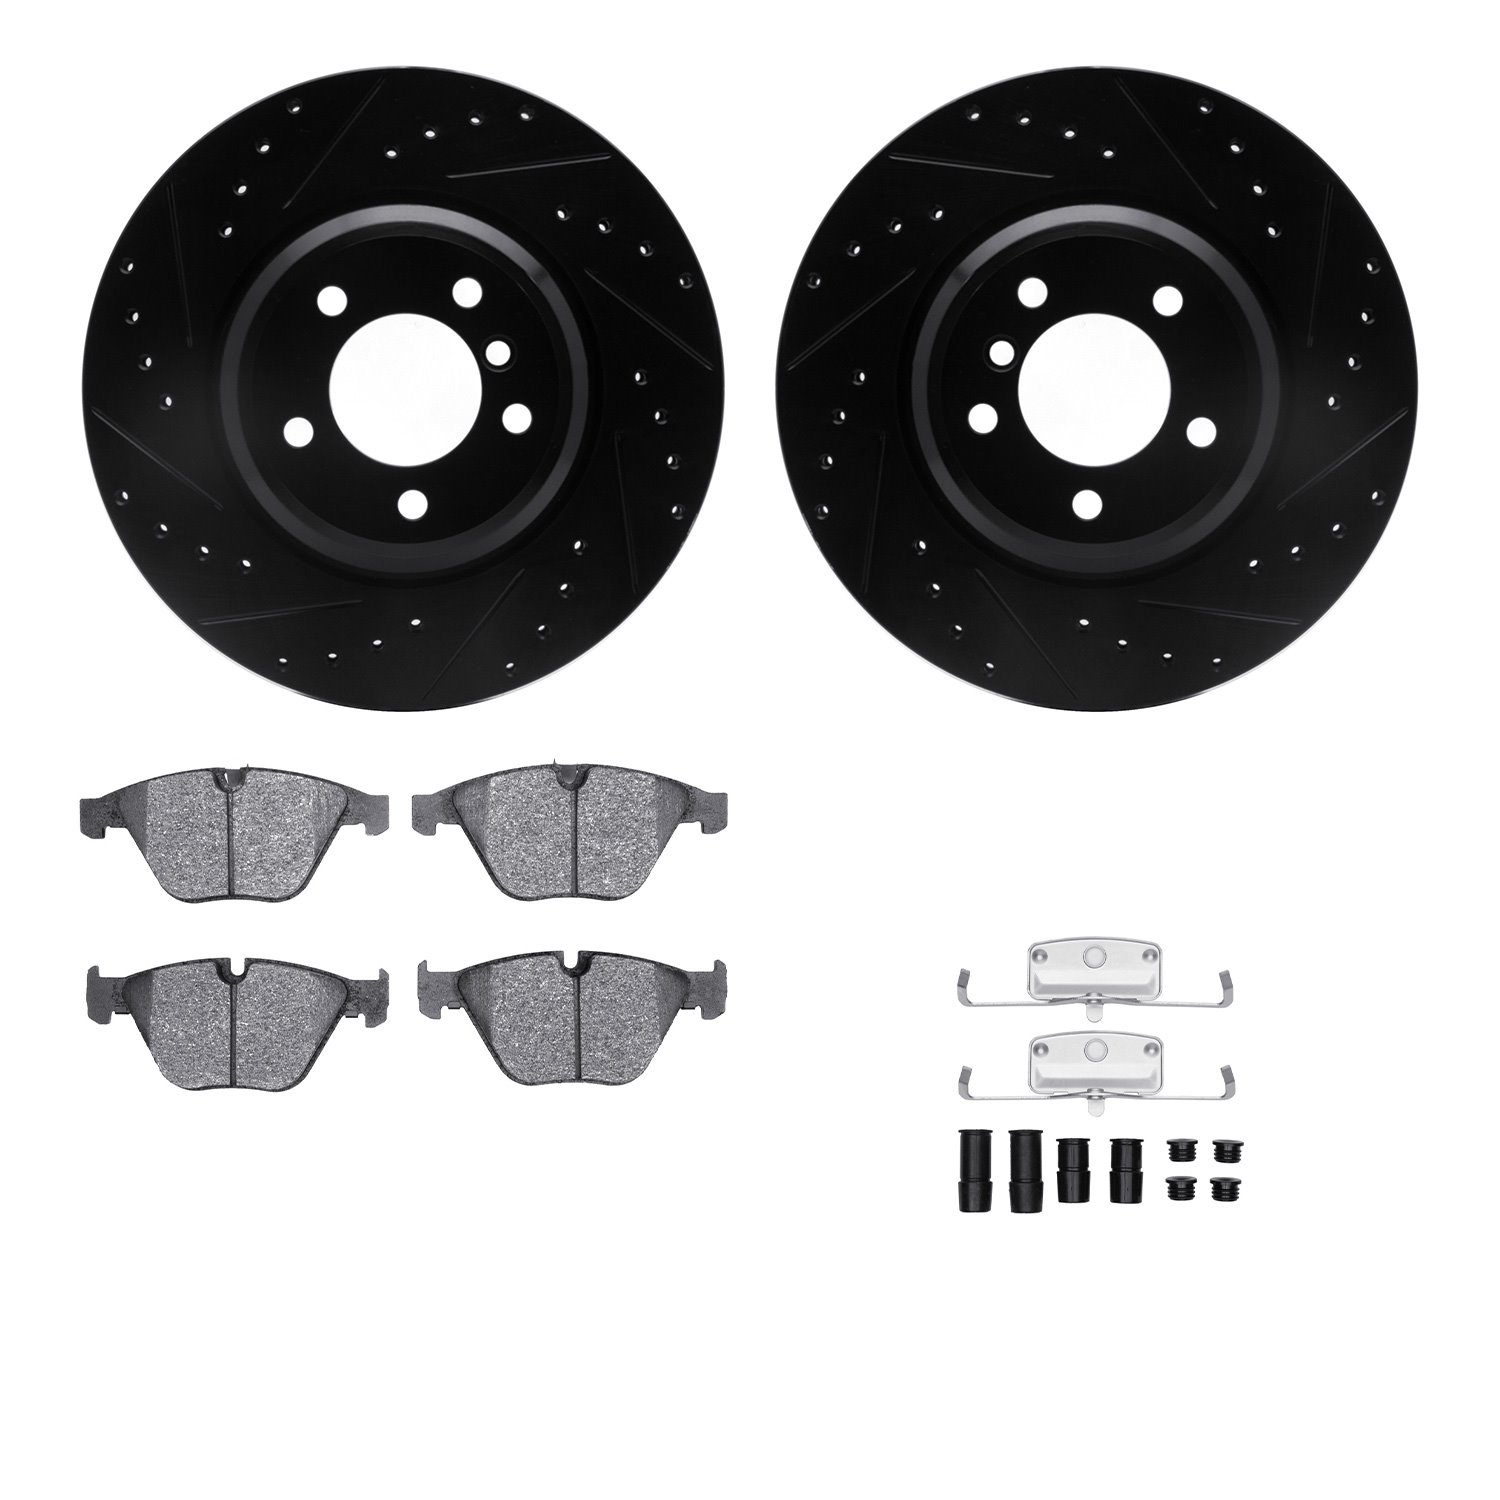 8312-31070 Drilled/Slotted Brake Rotors with 3000-Series Ceramic Brake Pads Kit & Hardware [Black], 2007-2015 BMW, Position: Fro